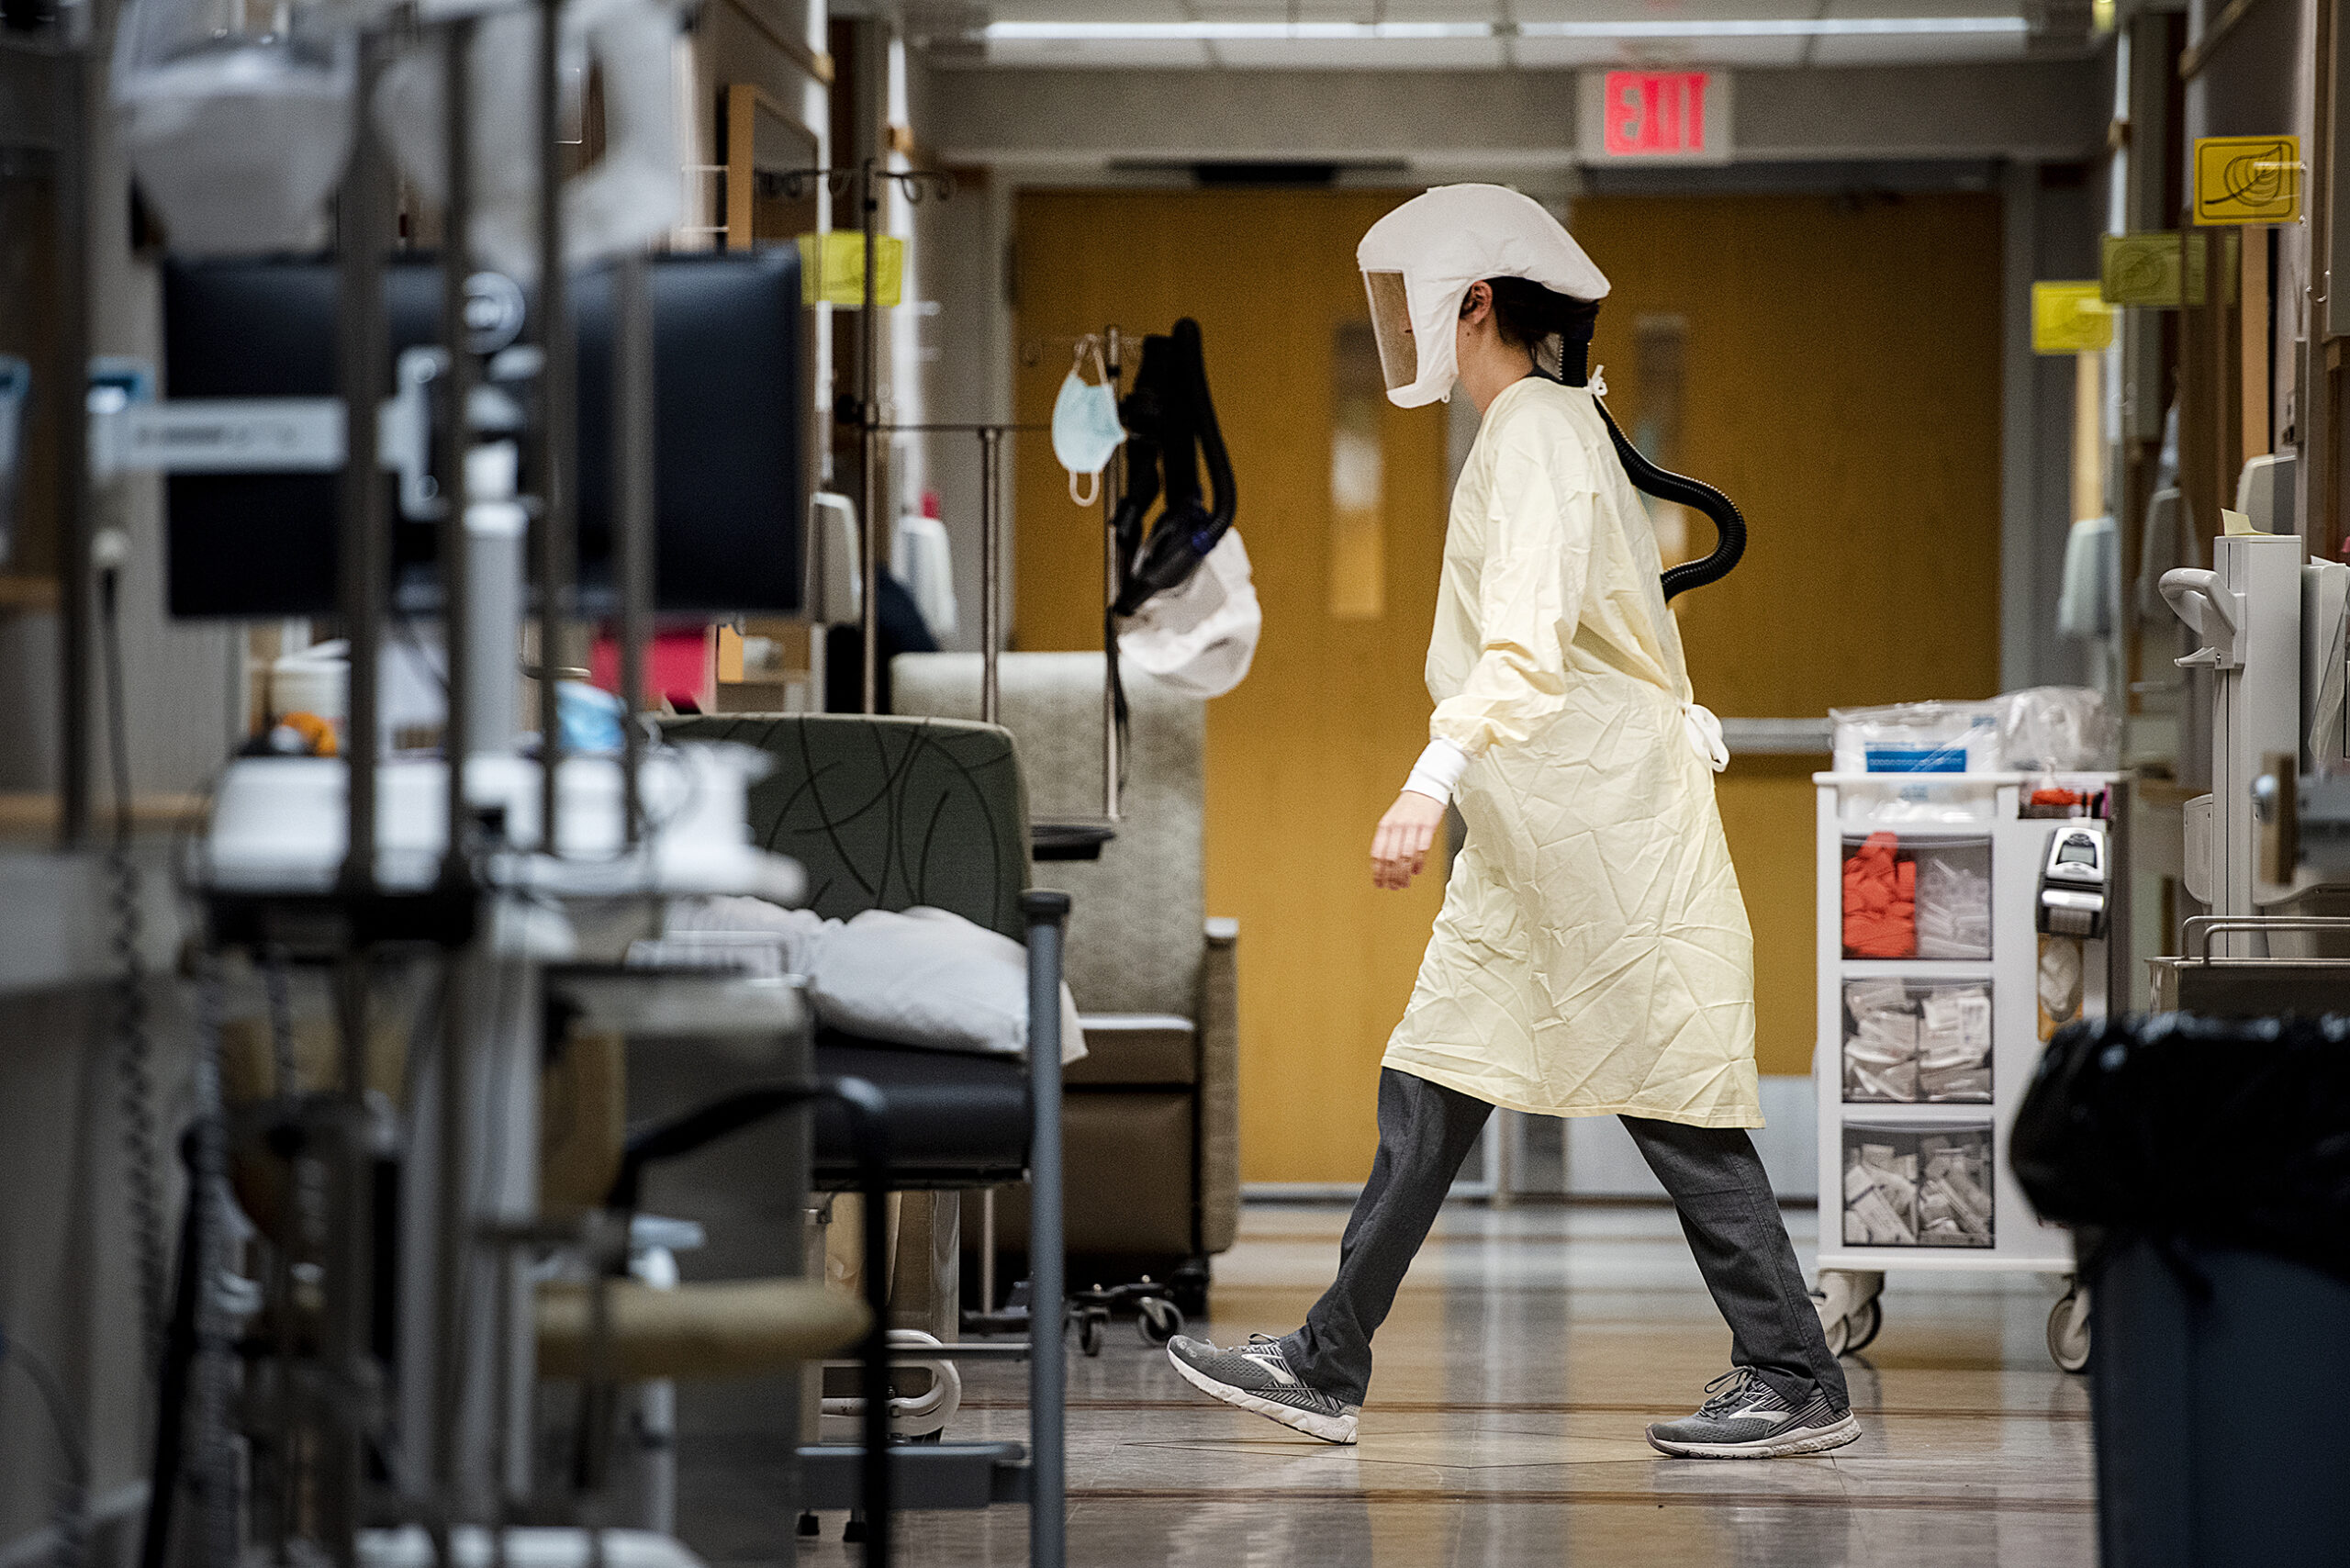 A woman in a yellow gown and protective hood walks through a hospital hallway